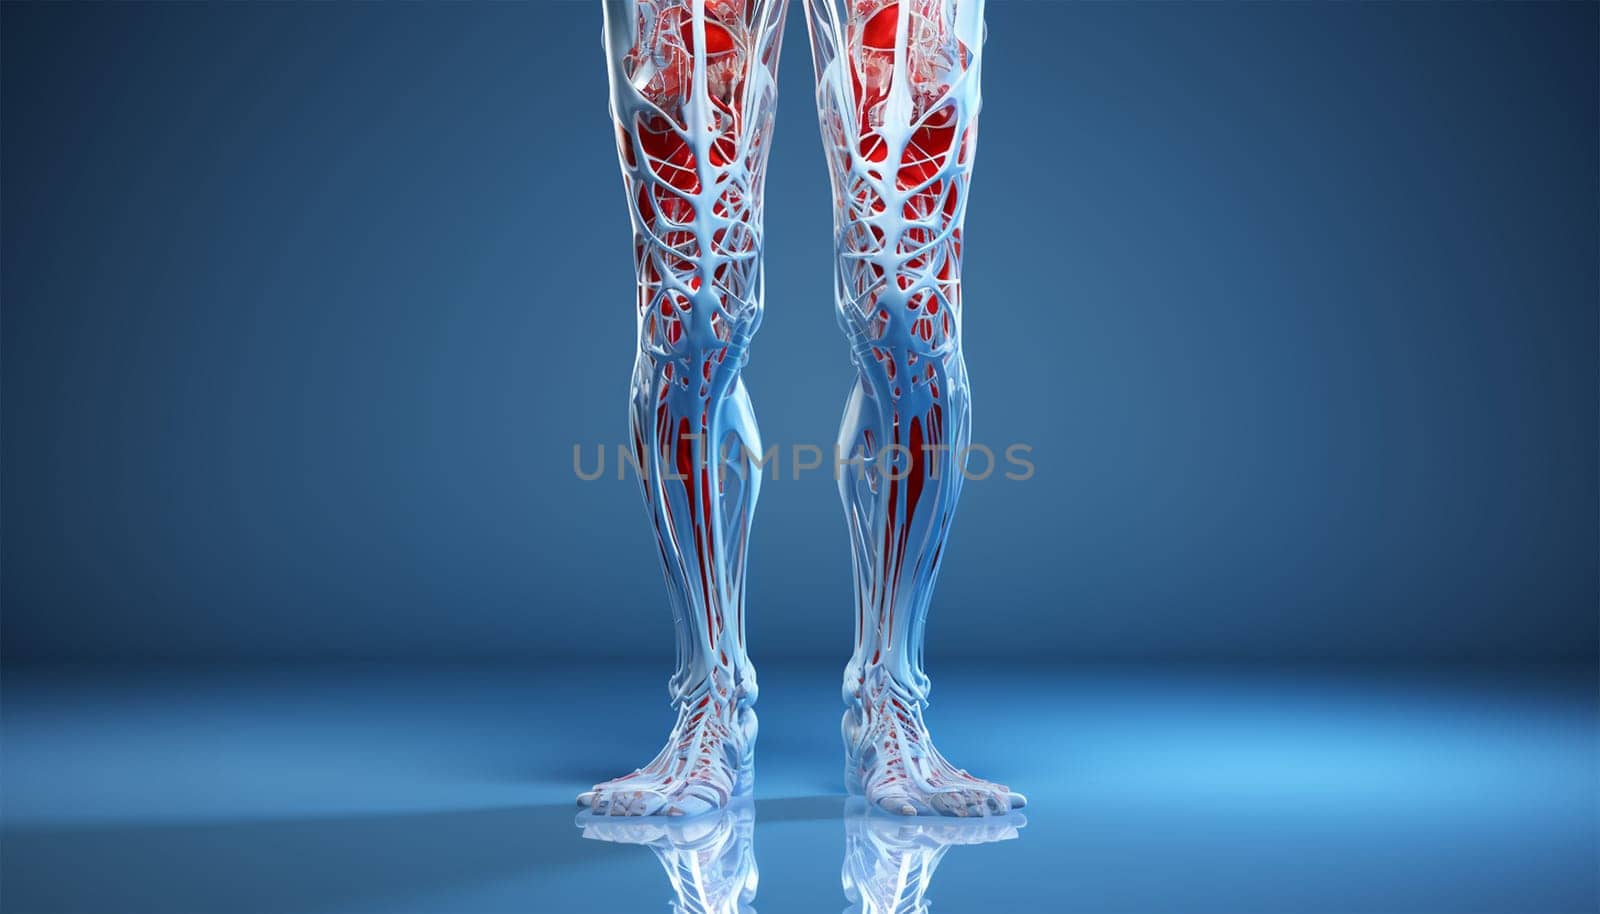 Anatomical Human head and shoulders. Demonstrating the muscles and ligaments of a human being. Image is on blue background. Mannequin anatomy internal organs, x ray,model for medical healthcare 3D by Annebel146